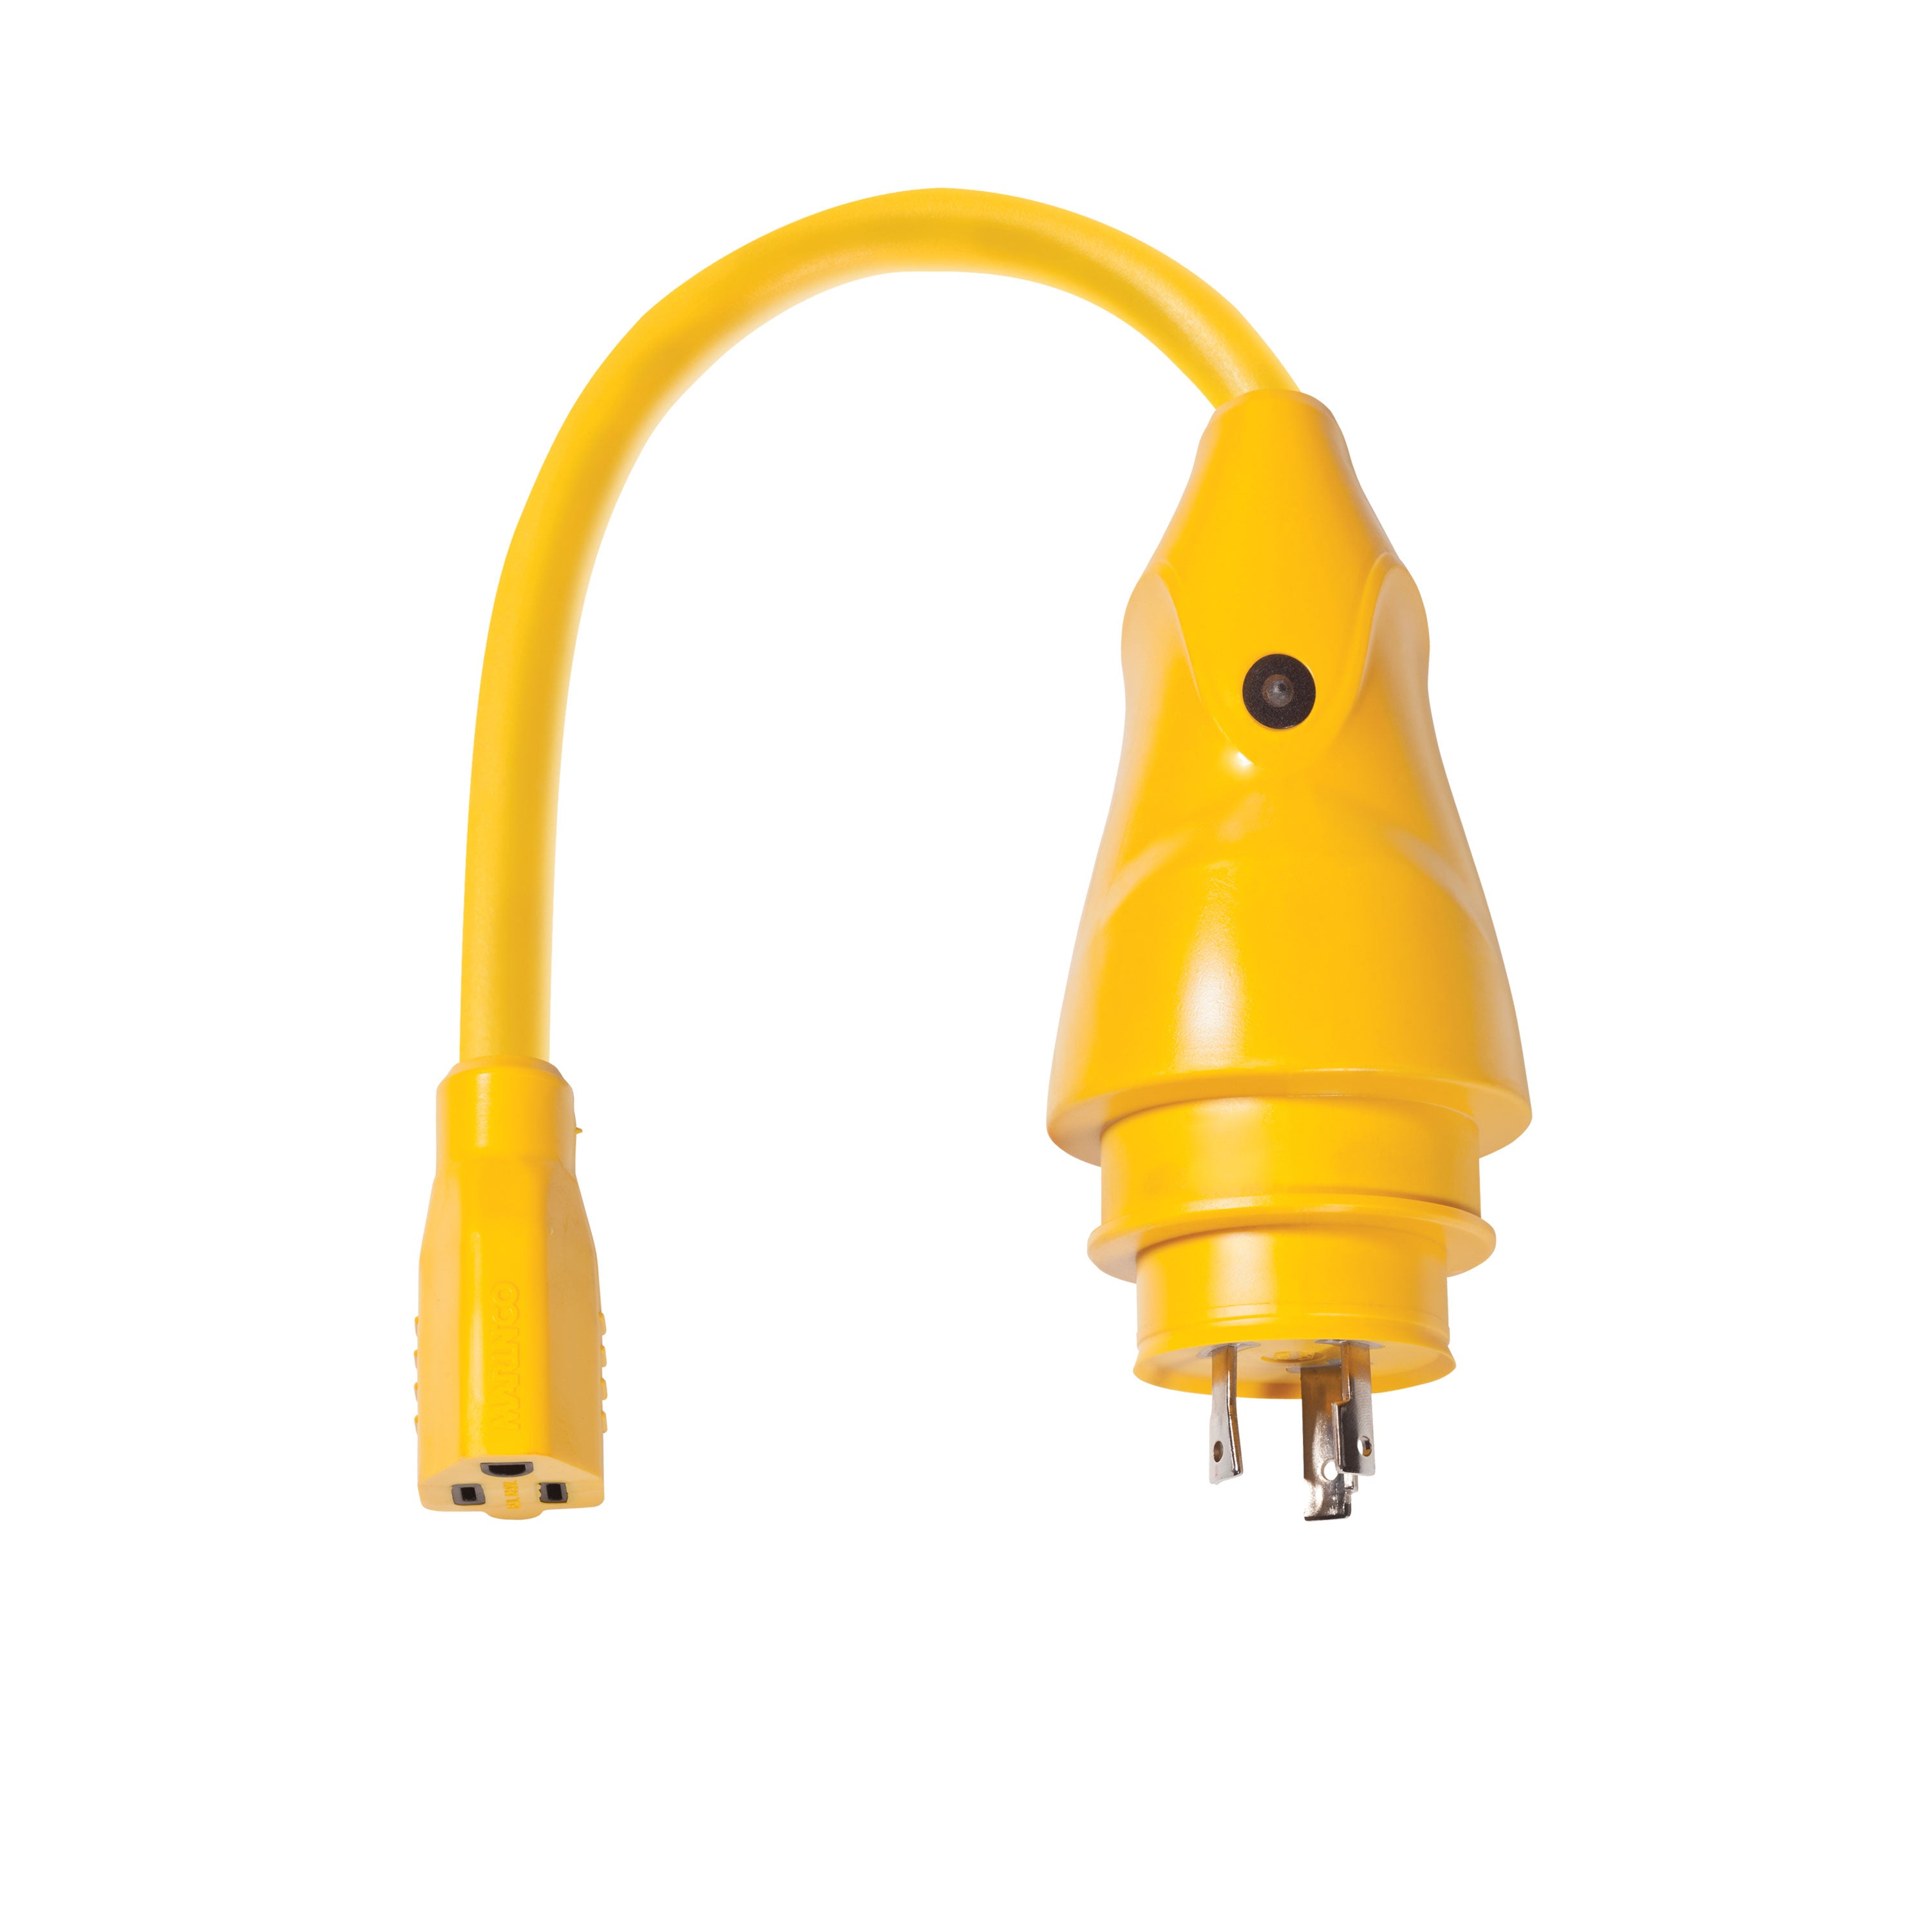 Marinco P30-15 EEL ShorePower Pigtail Adapter - 30A Male to 15A Female